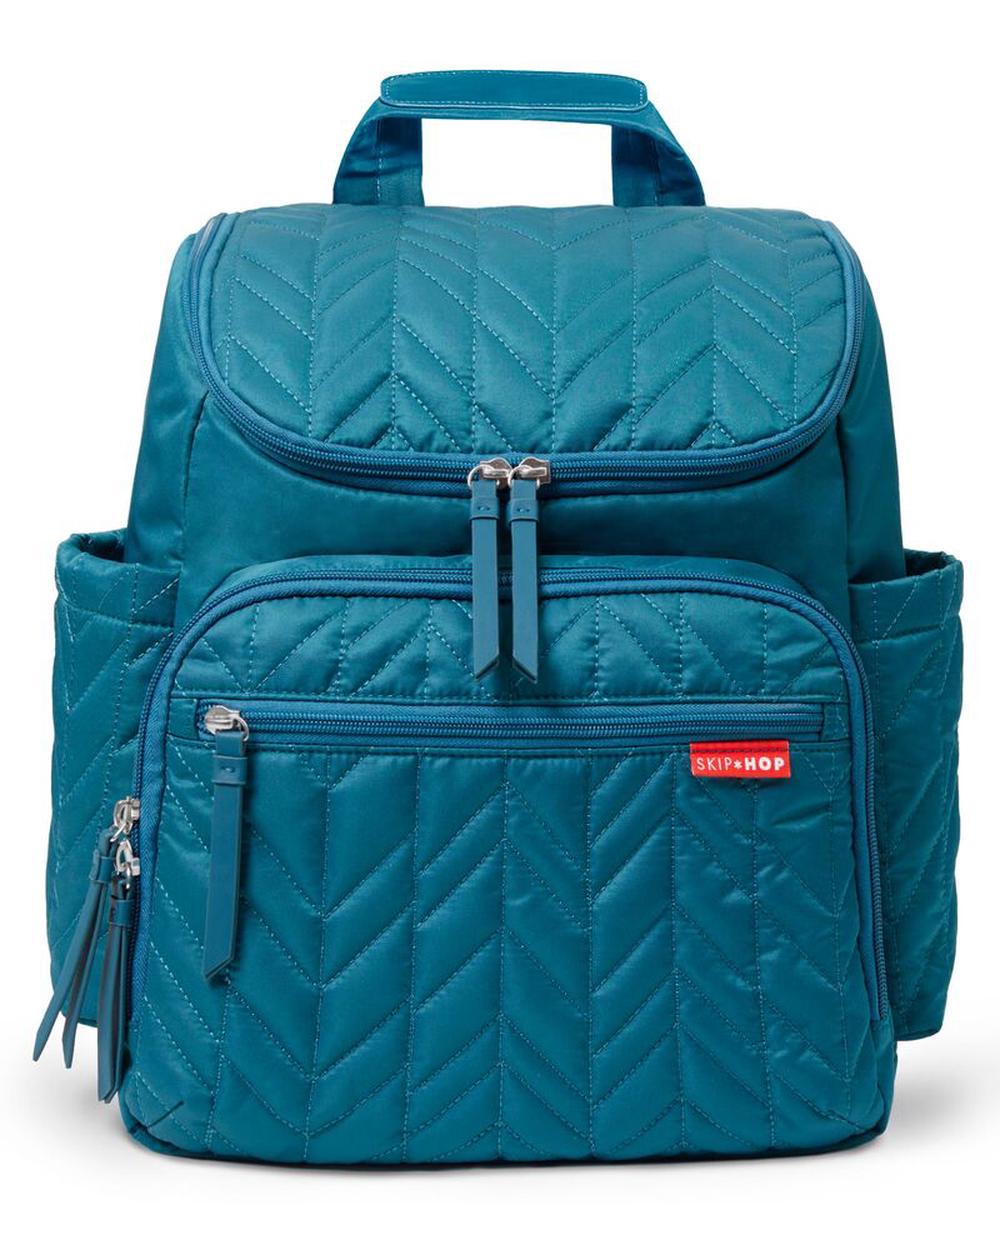 Skip Hop Forma Nappy Bag Backpack (Peacock) | Buy online at The Nile